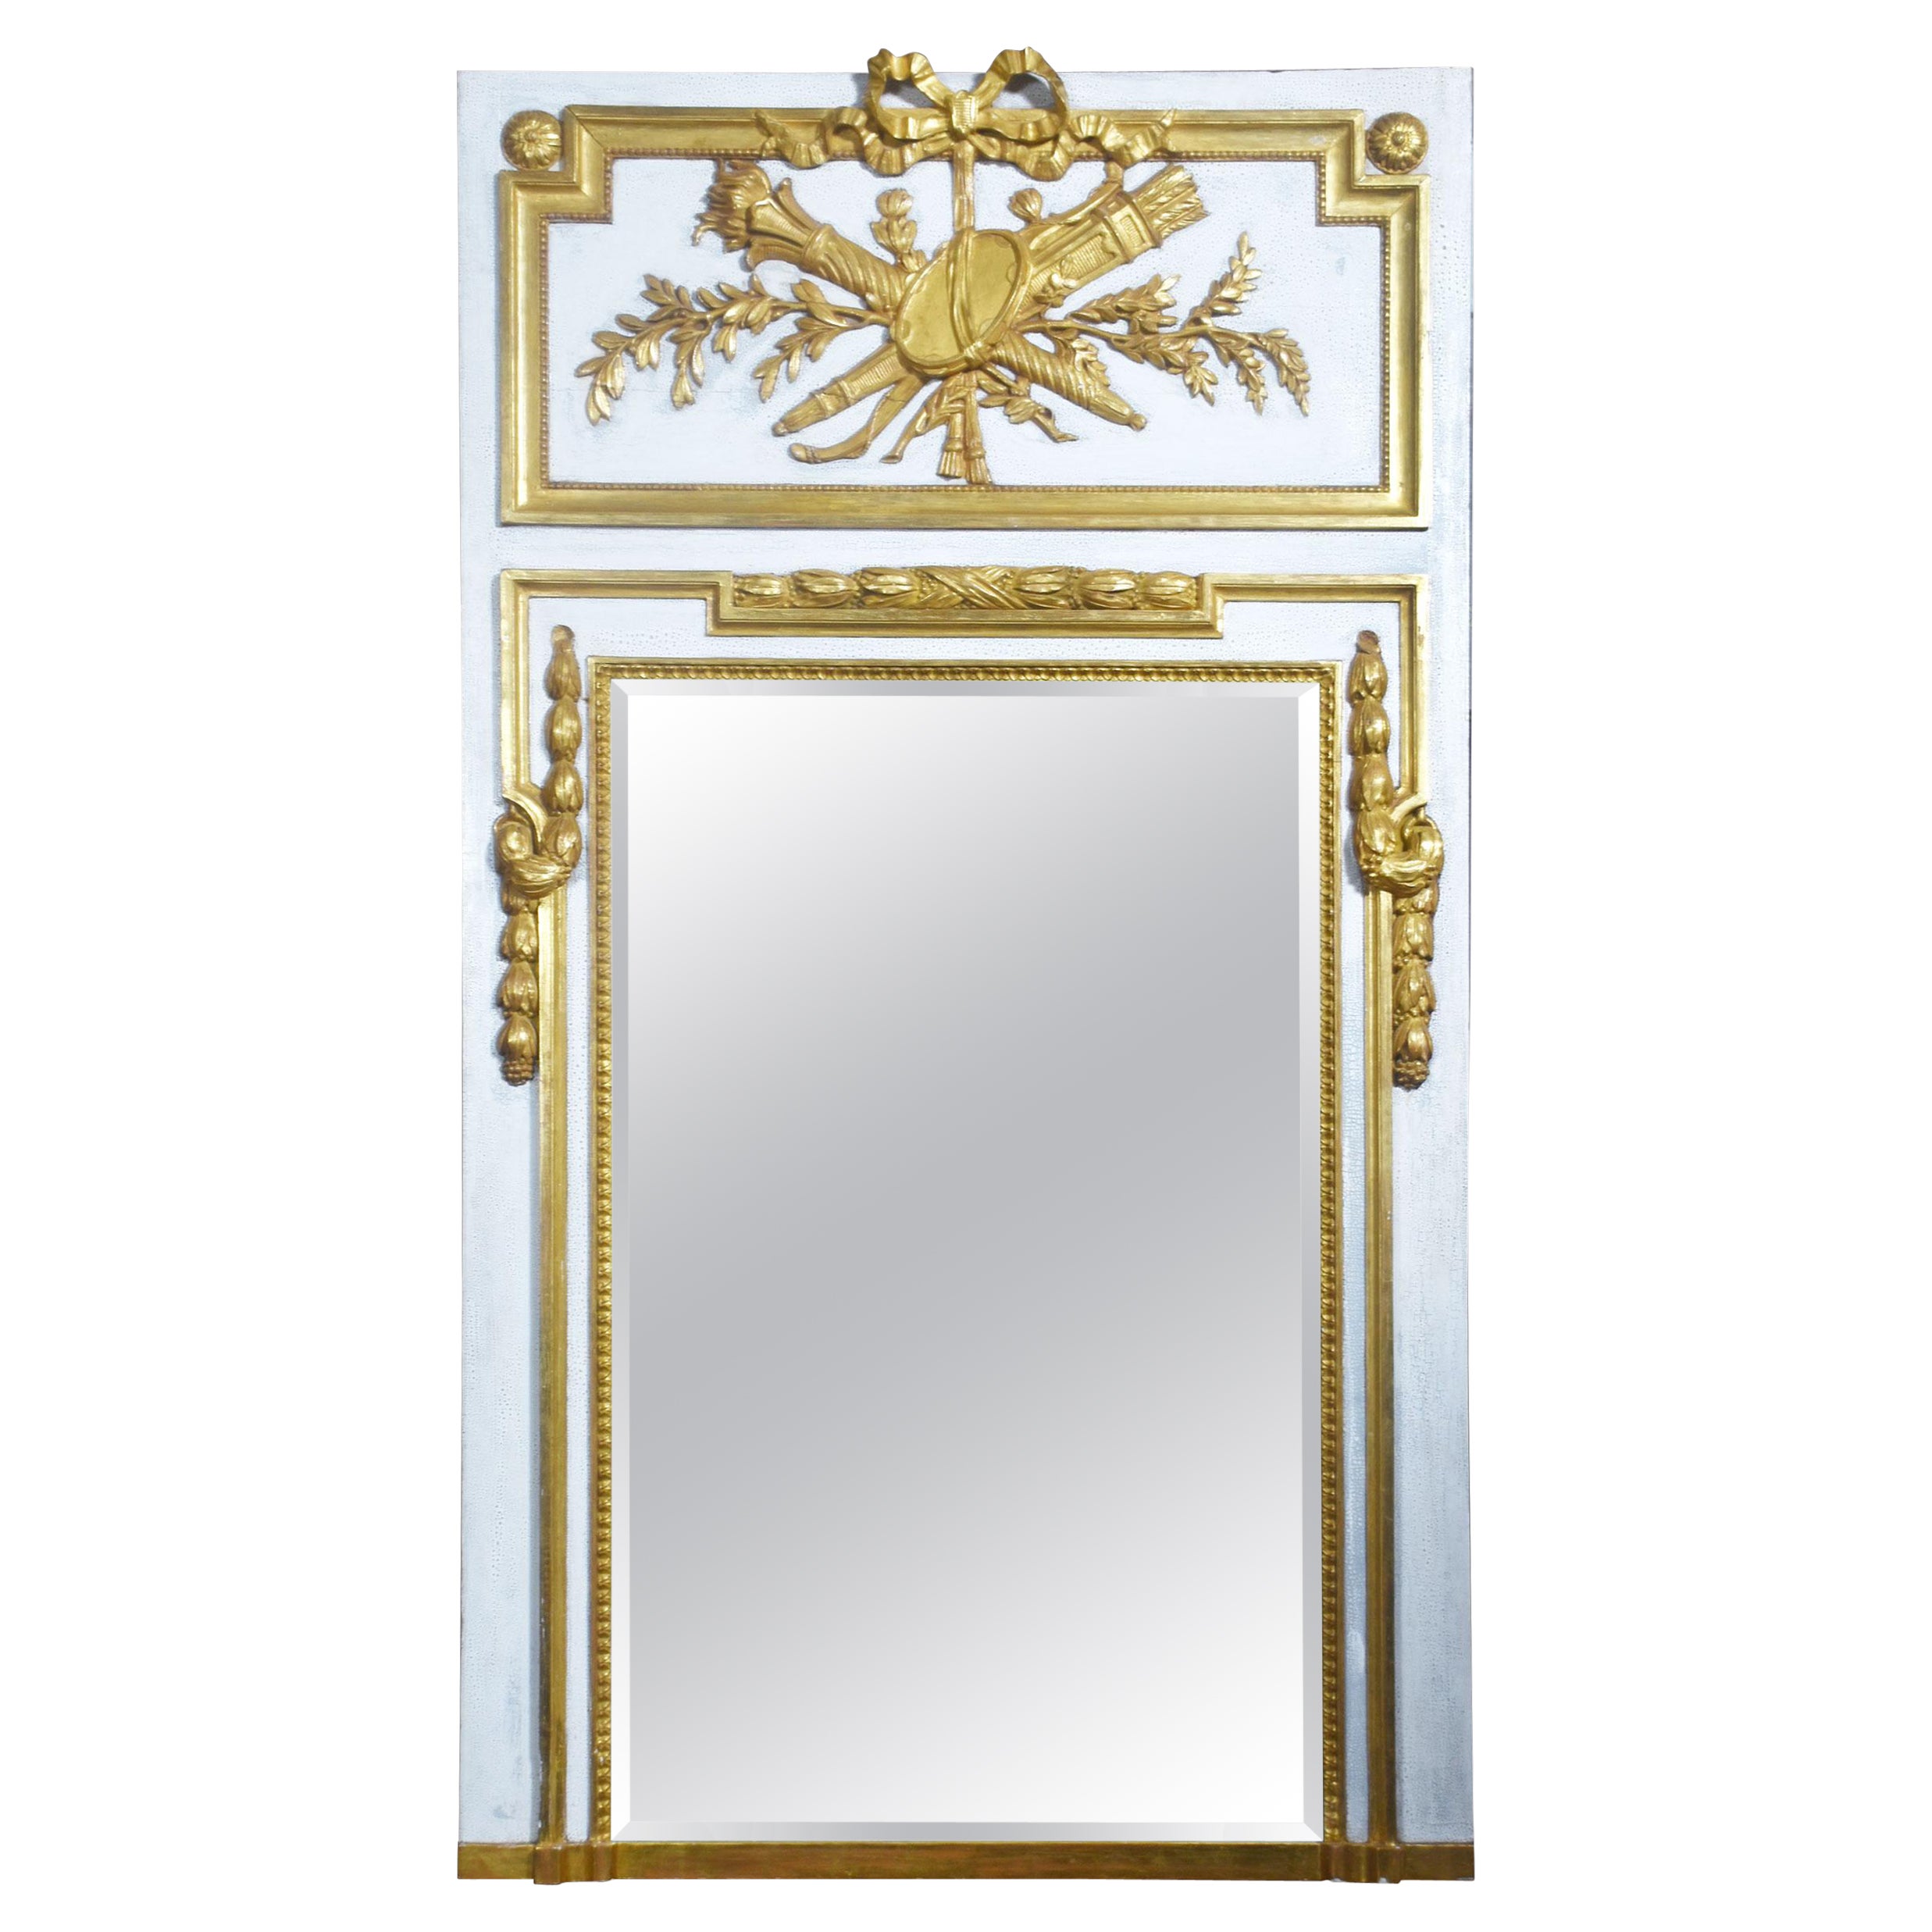 Painted parcel gilt trumeau wall mirror For Sale